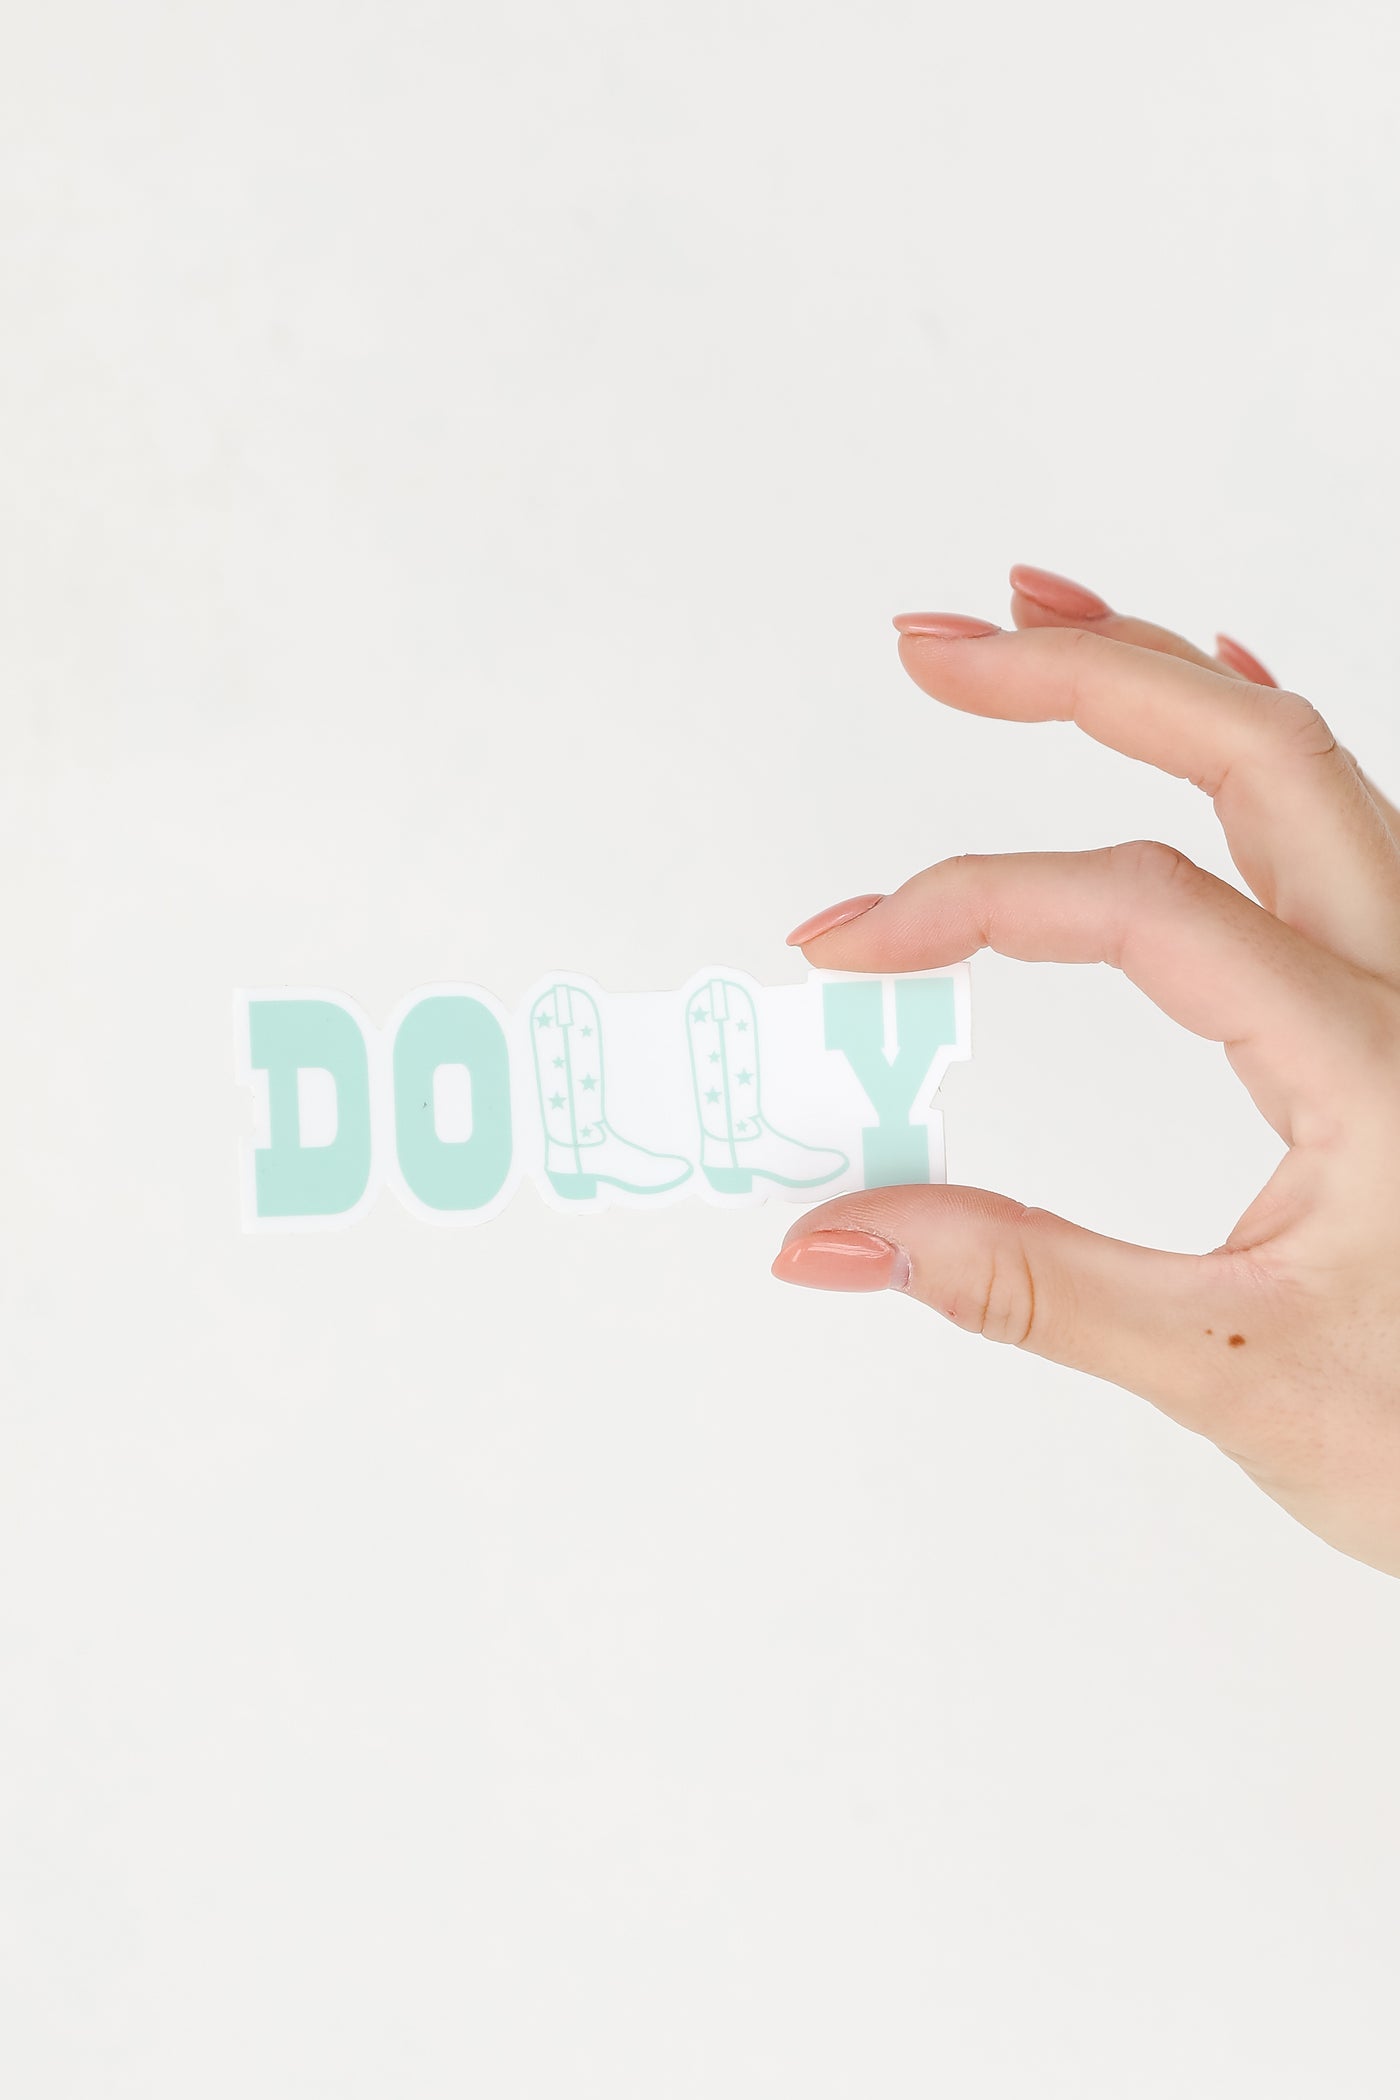 Dolly Boots Sticker in mint